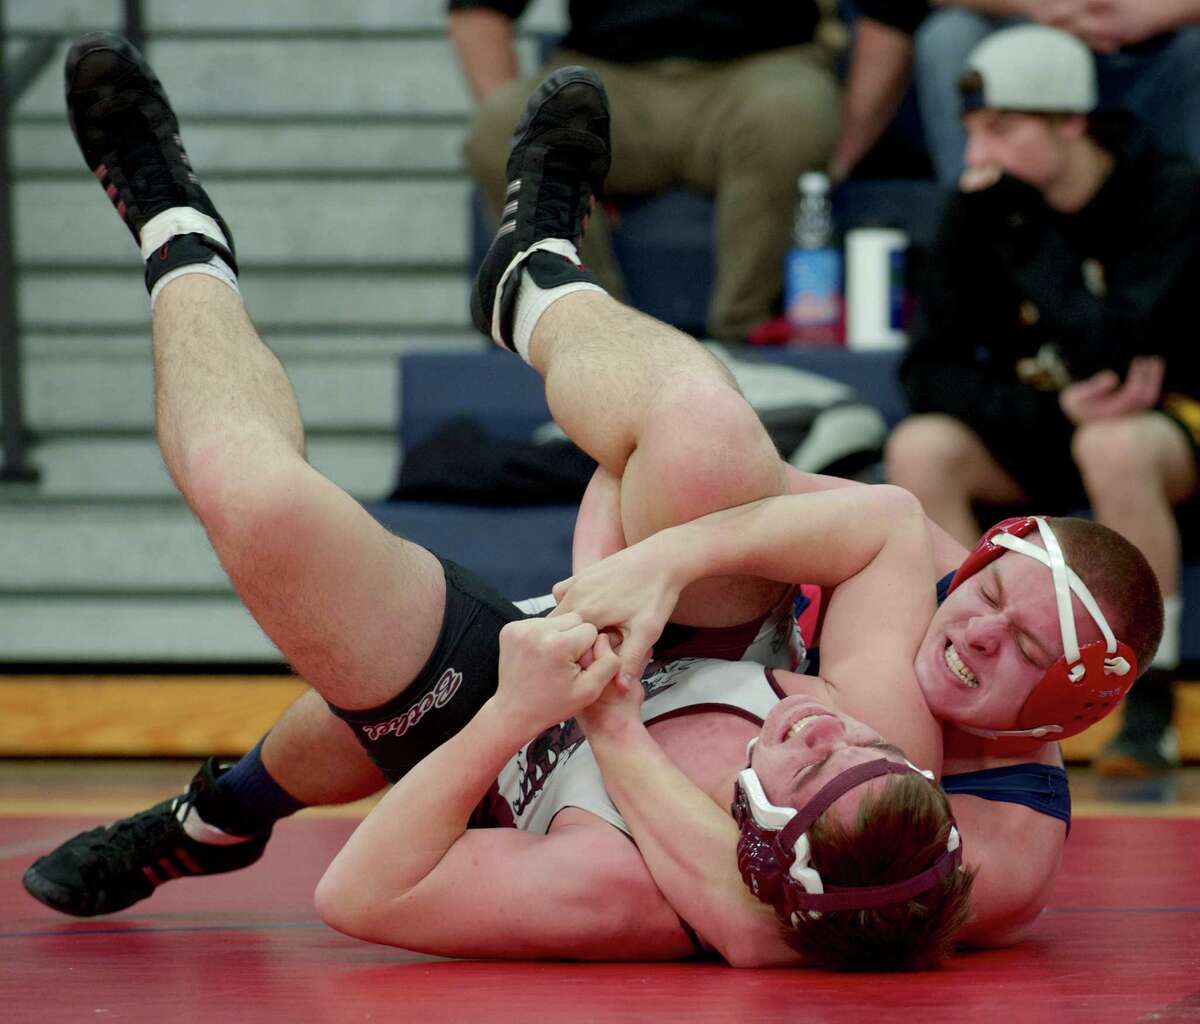 New Fairfield's Joe Alesi, right, and Bethel's Quinn Vissak wrestle during New Fairfield High School's Duals Tournament, on Saturday, February 1, 2014, in New Fairfield, Conn. They are competing in the 220 lb. class.